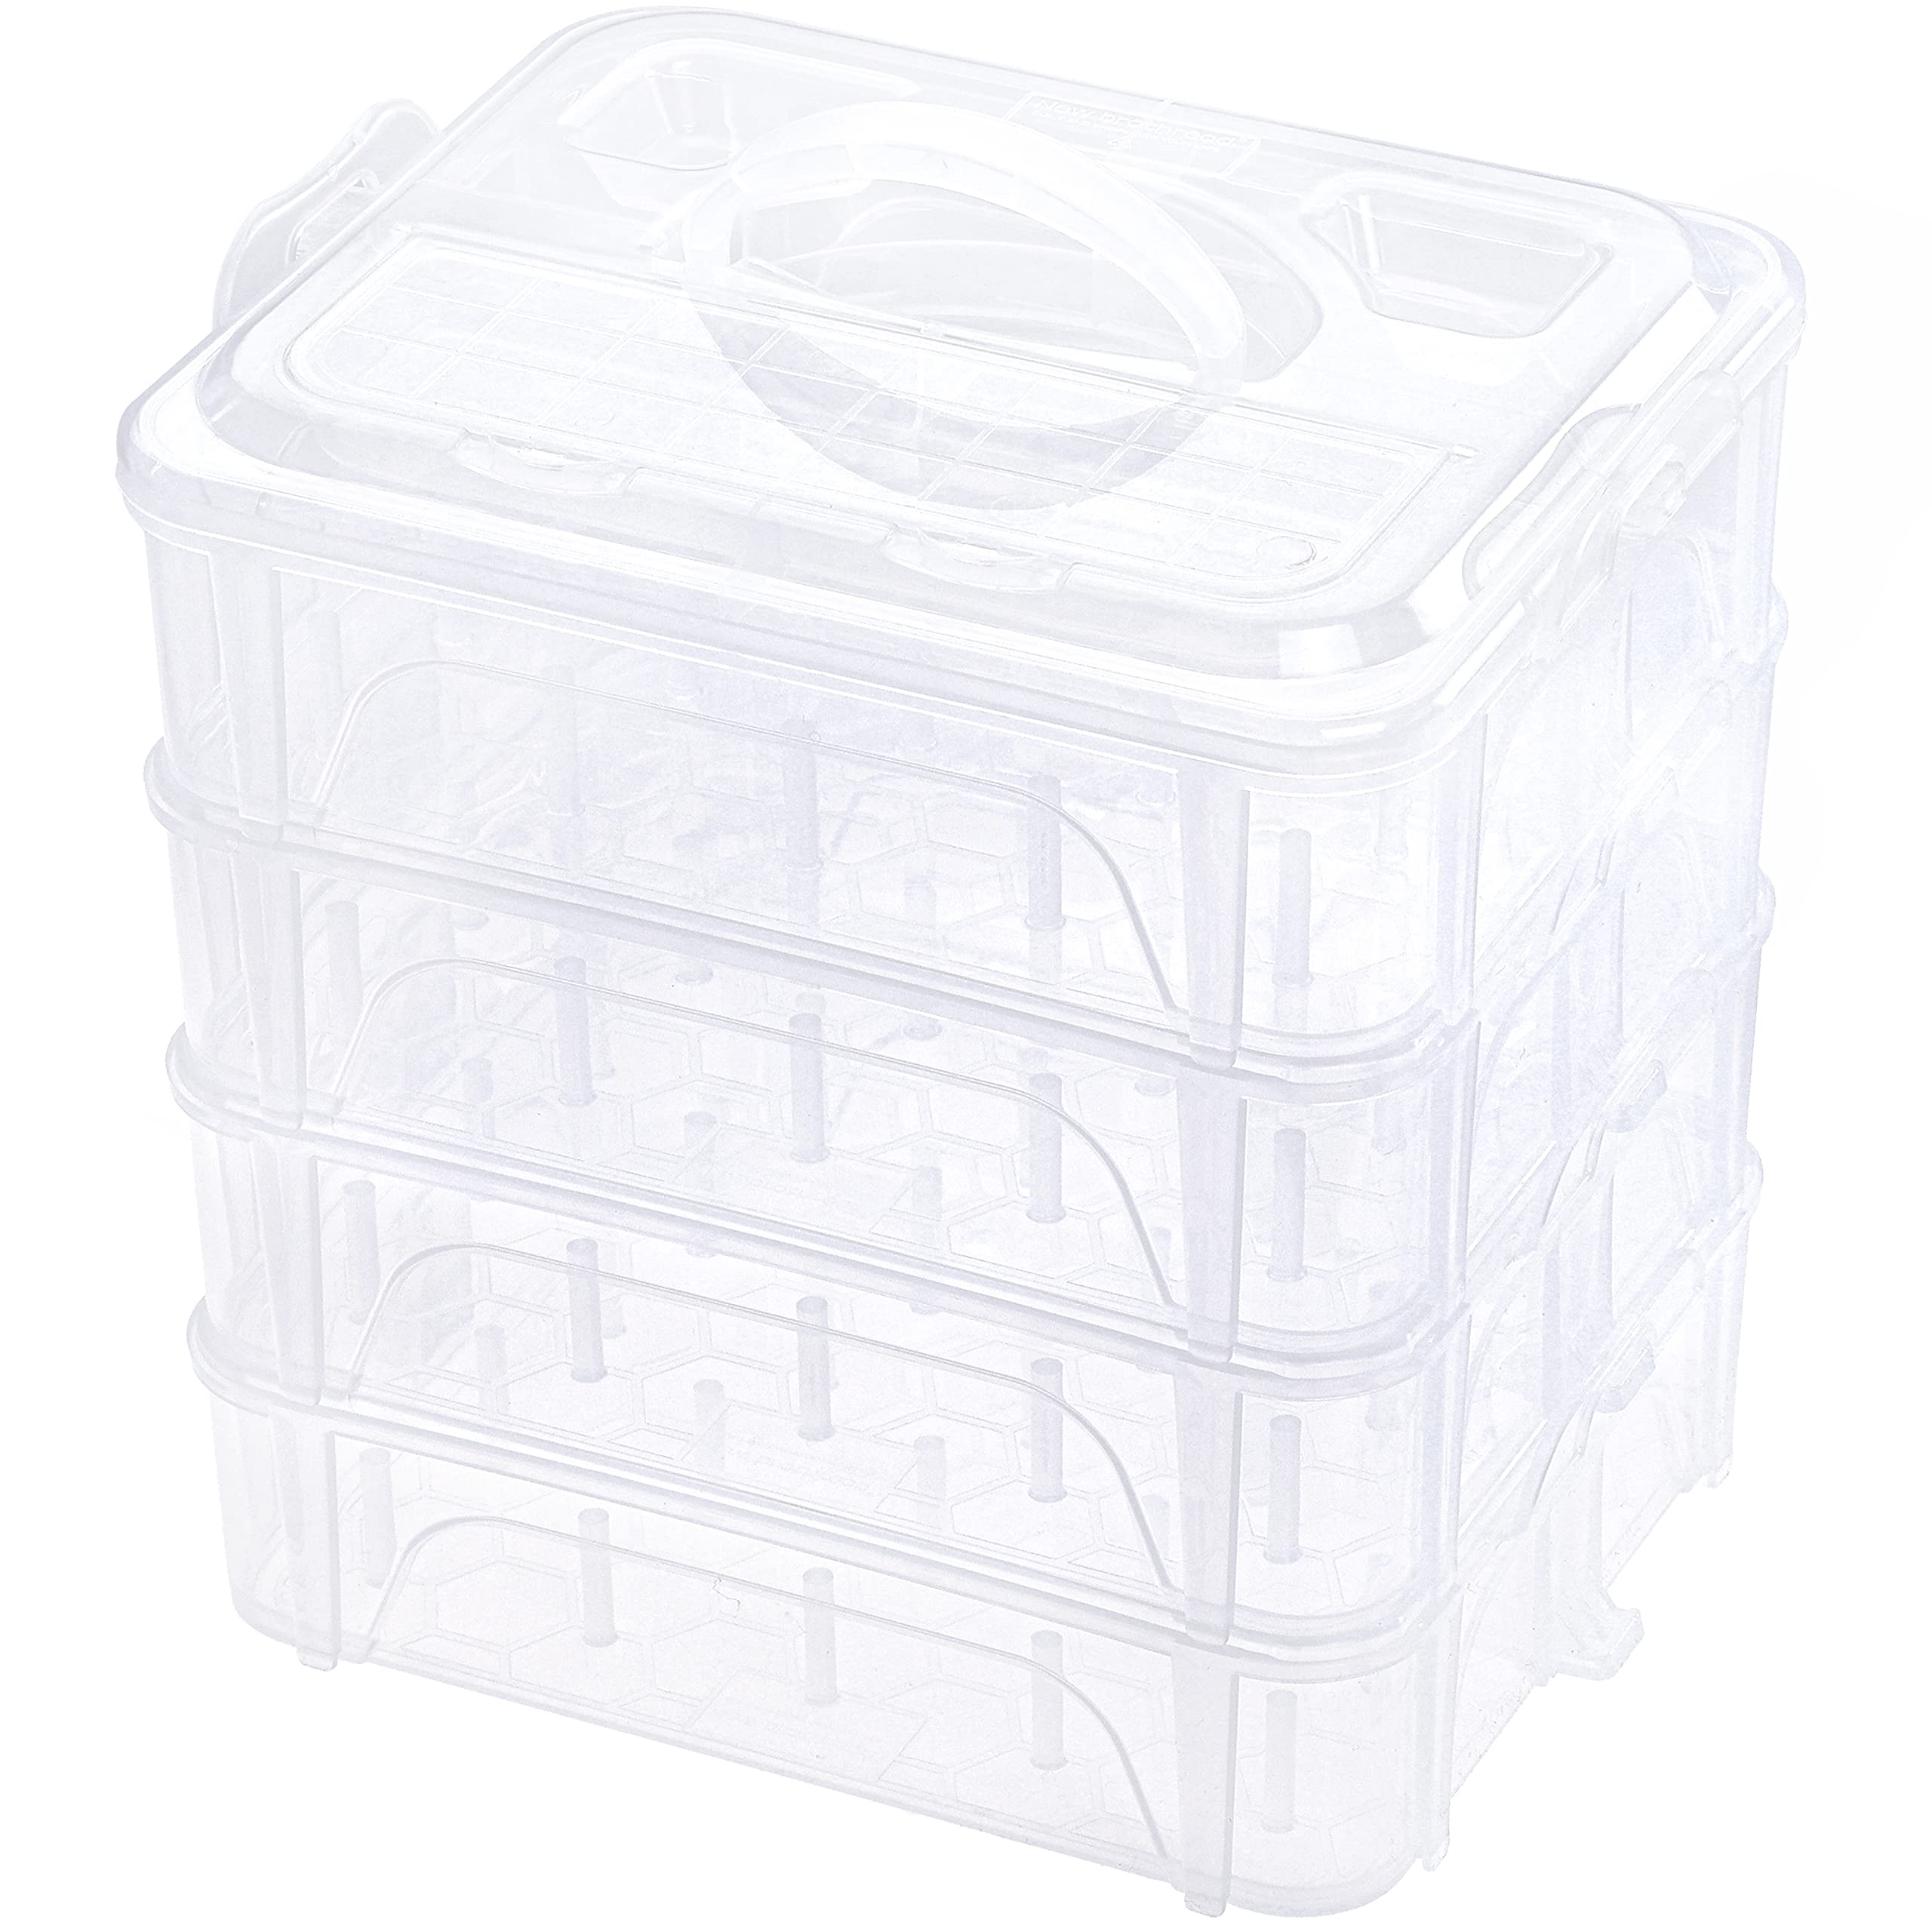 New brothread 4 Layers Stackable Clear Storage Box/Organizer for